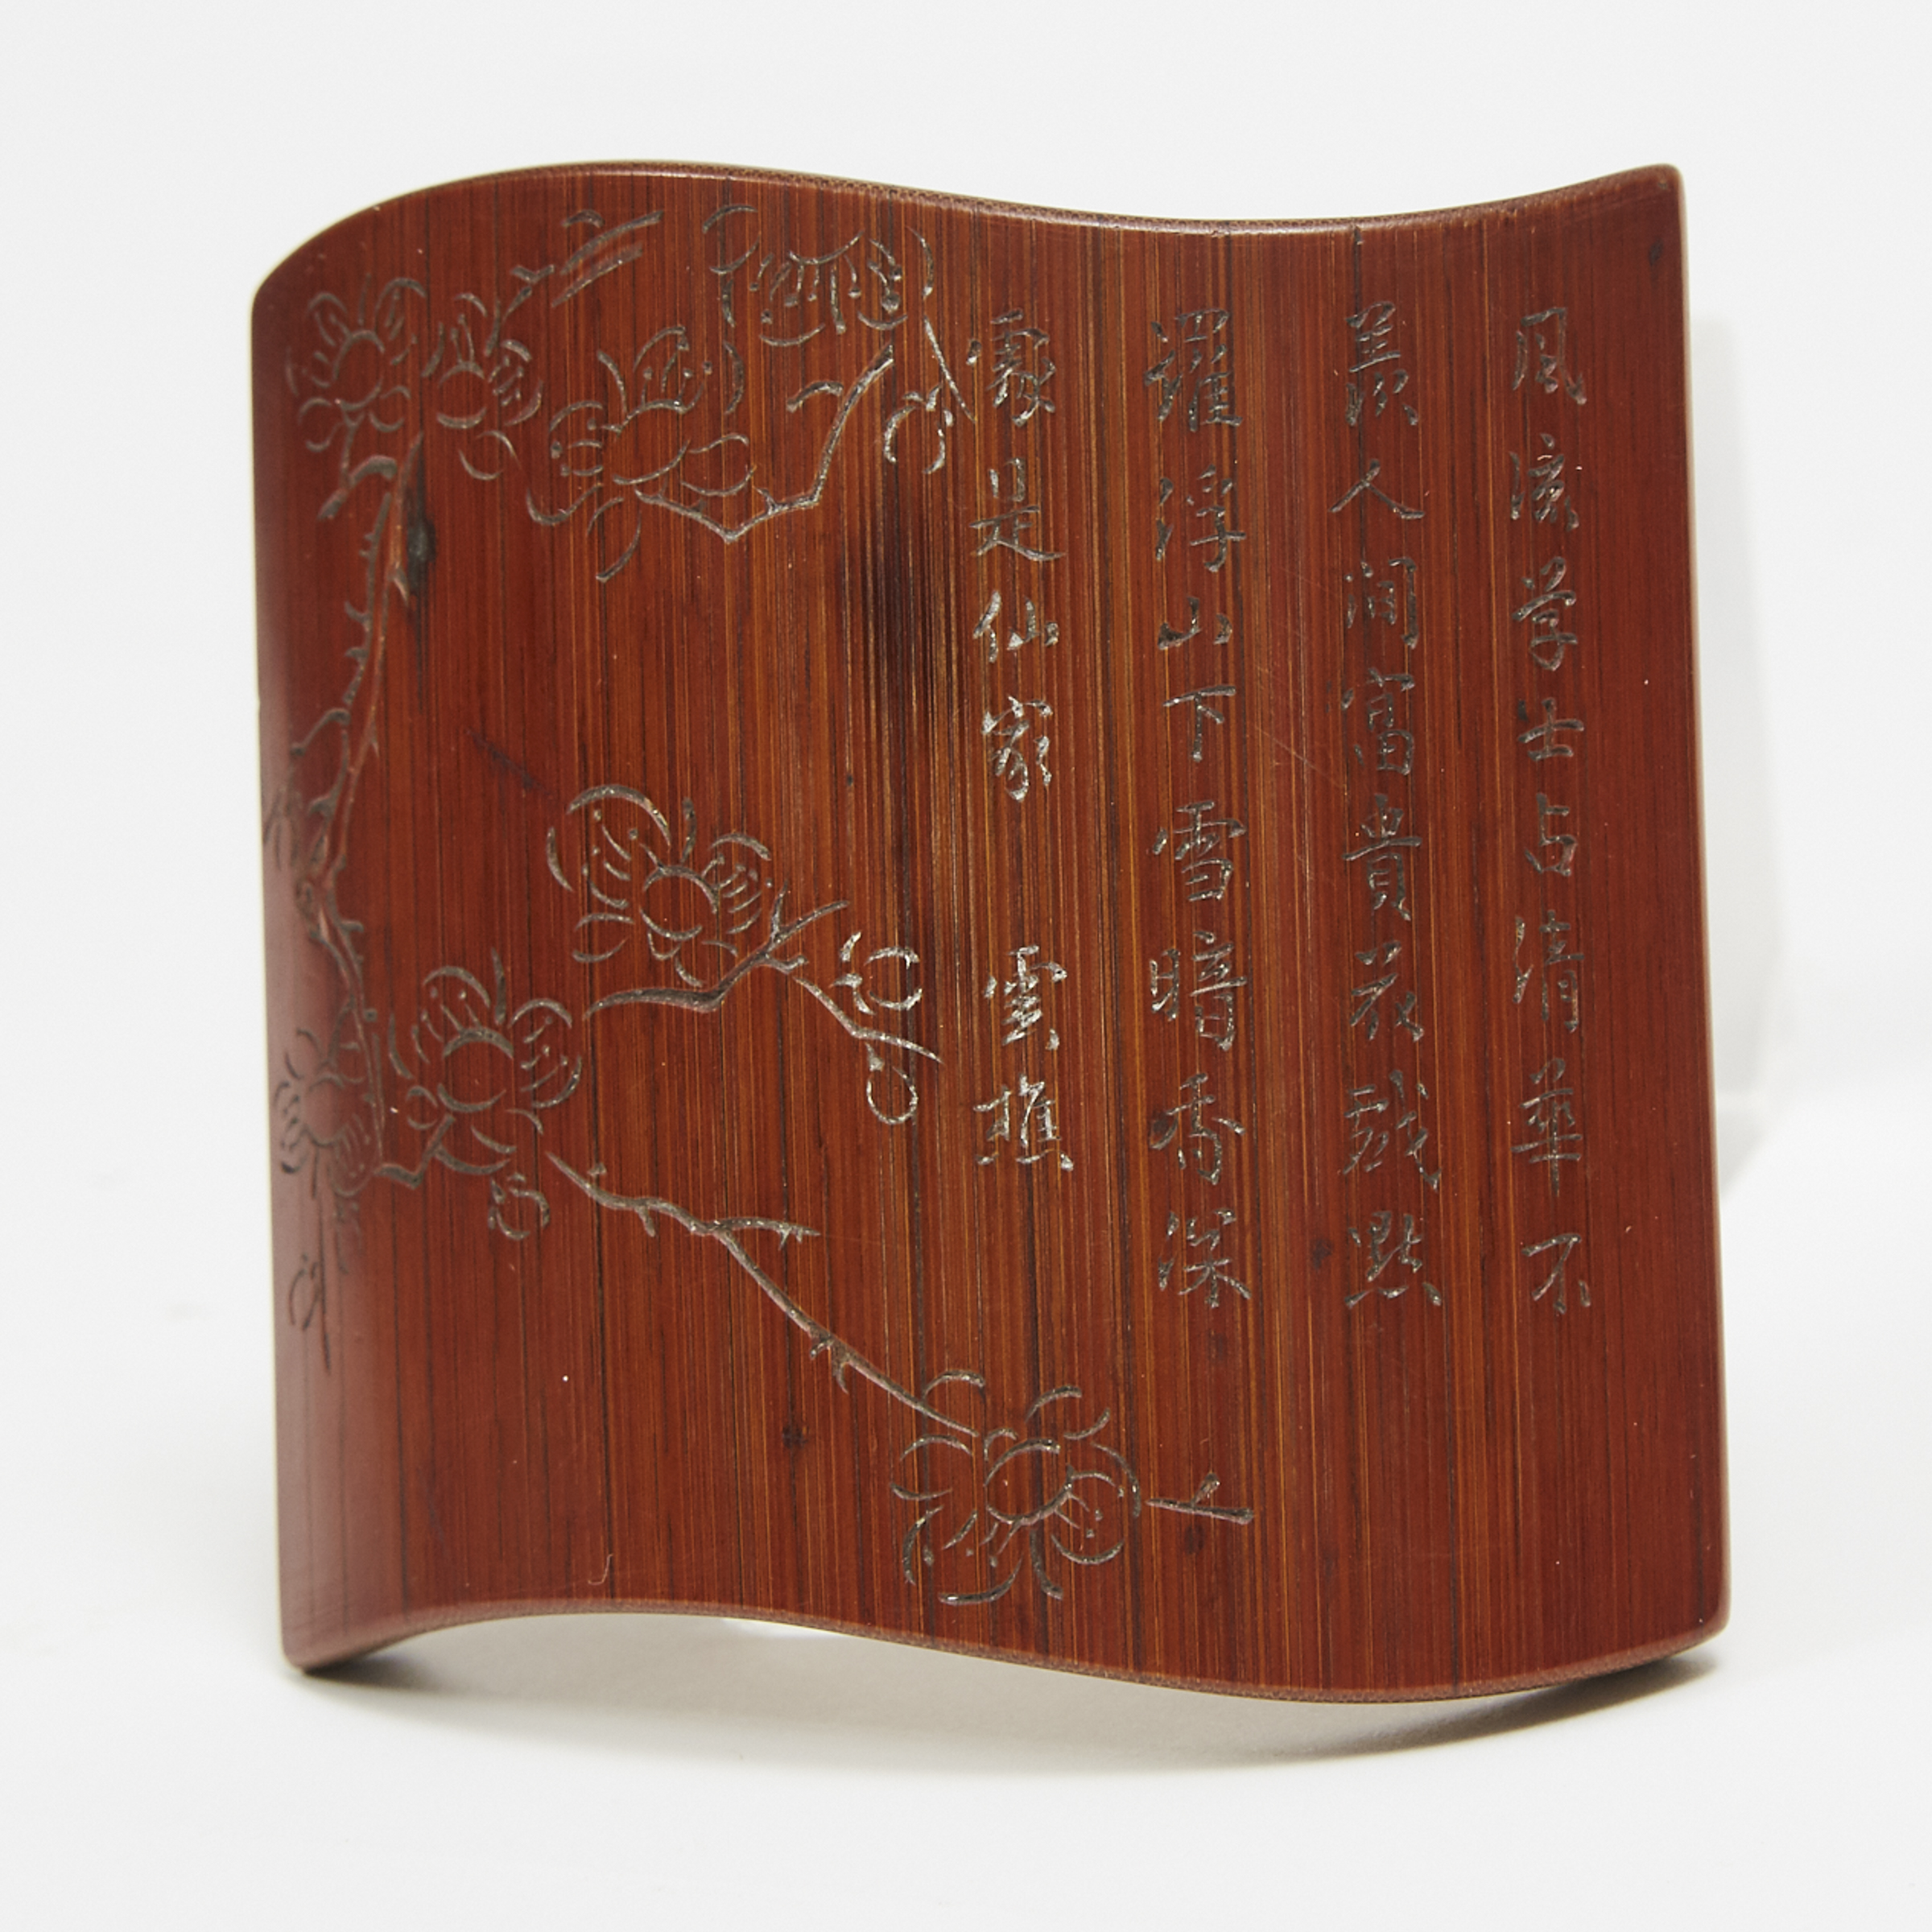 An Incised Bamboo Wrist Rest, Signed Dengwei